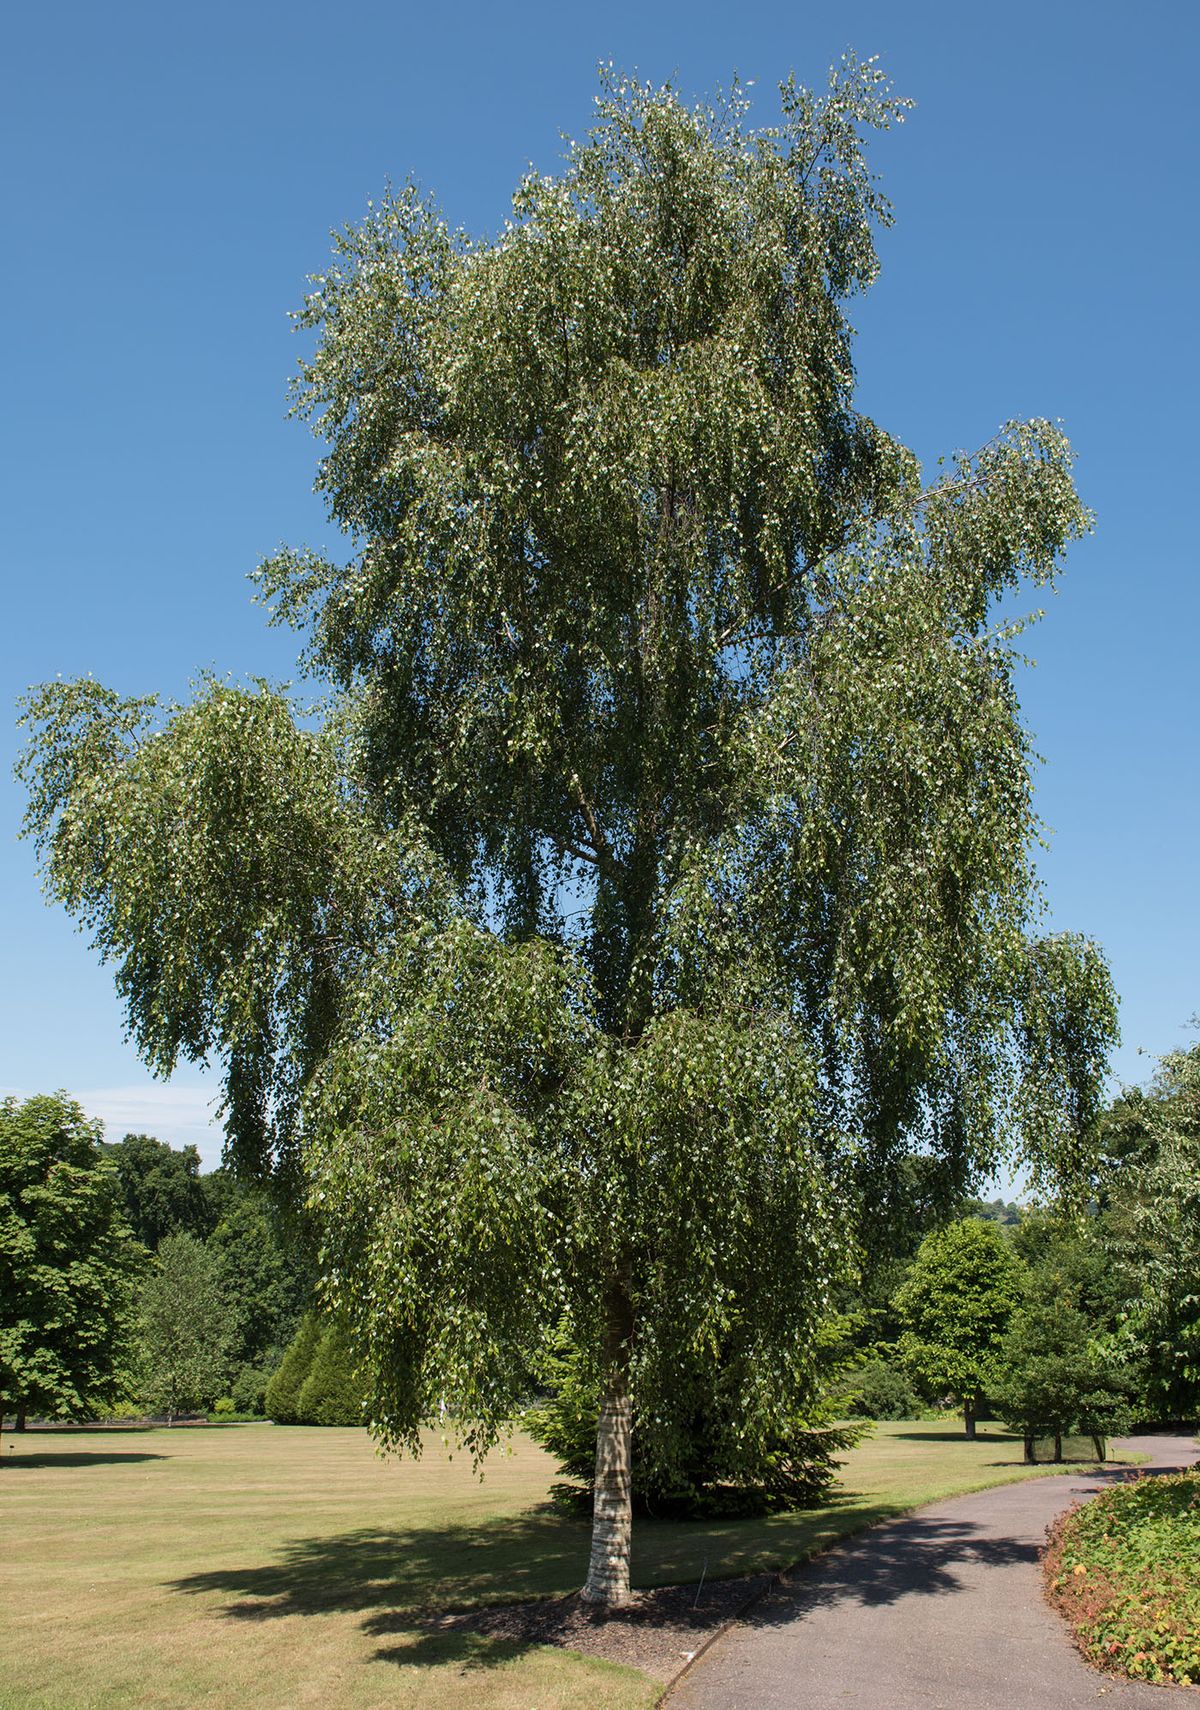 Weeping,Silver,Birch,Tree,(betula,Pendula,'tristis'),In,A,Park